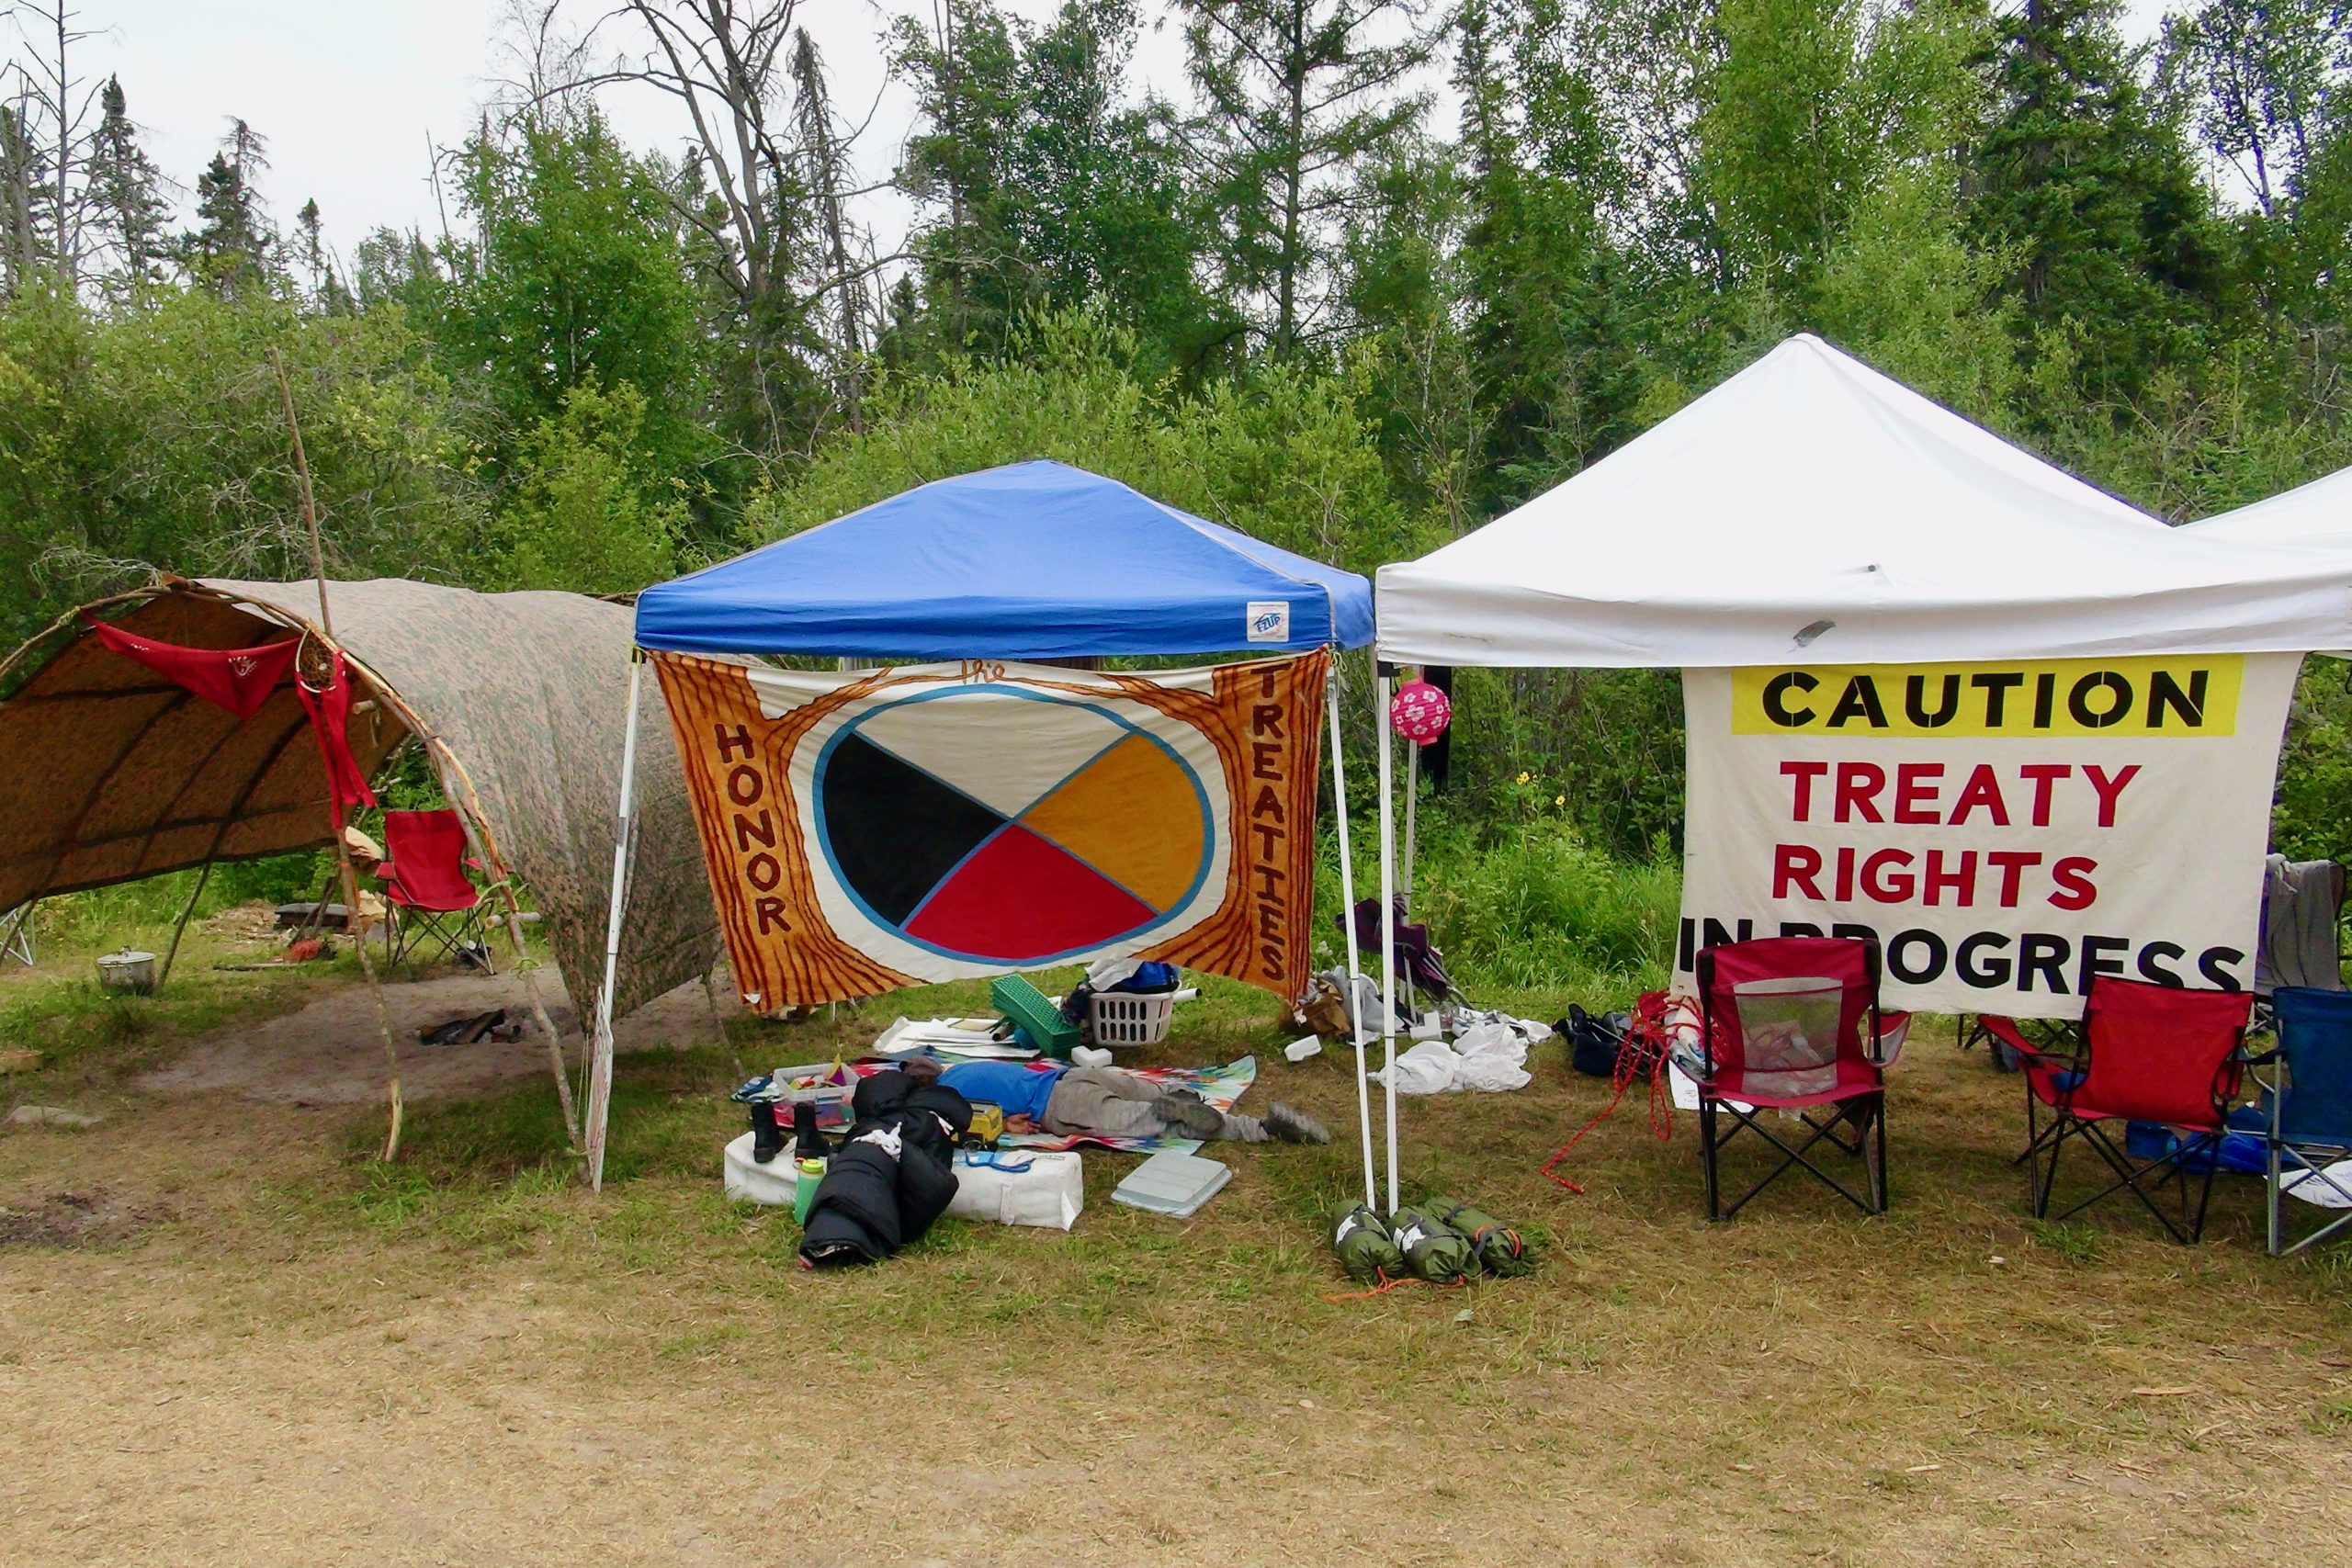 Caption needed. Signs at the camp read, “Honor Treaties” and “Caution: Treaty Rights in Progress.”